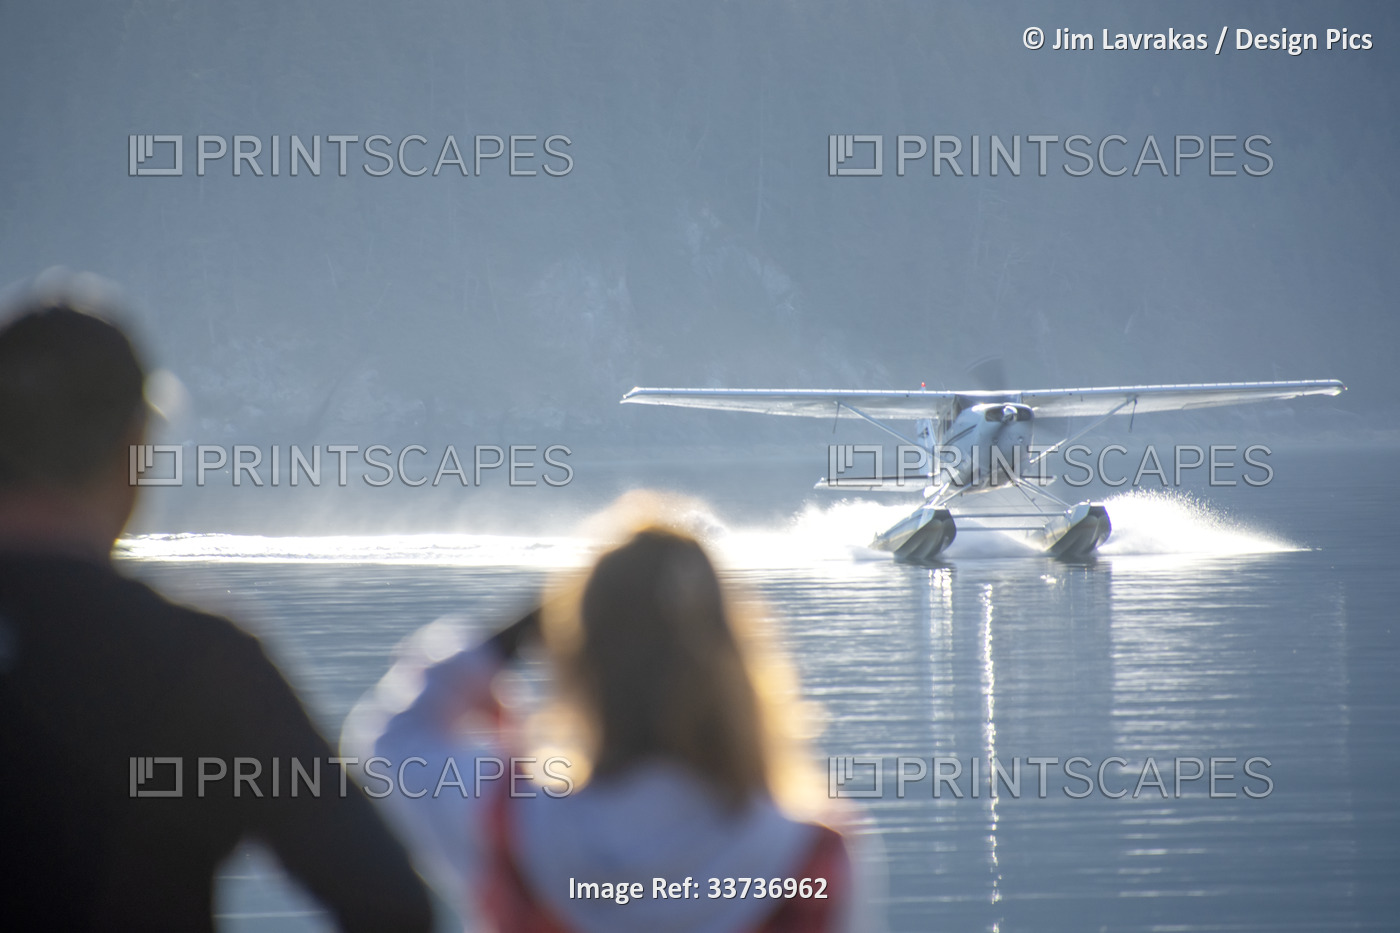 Guests at a lodge in Kachemak Bay wait for the arrival of a float plane to take ...